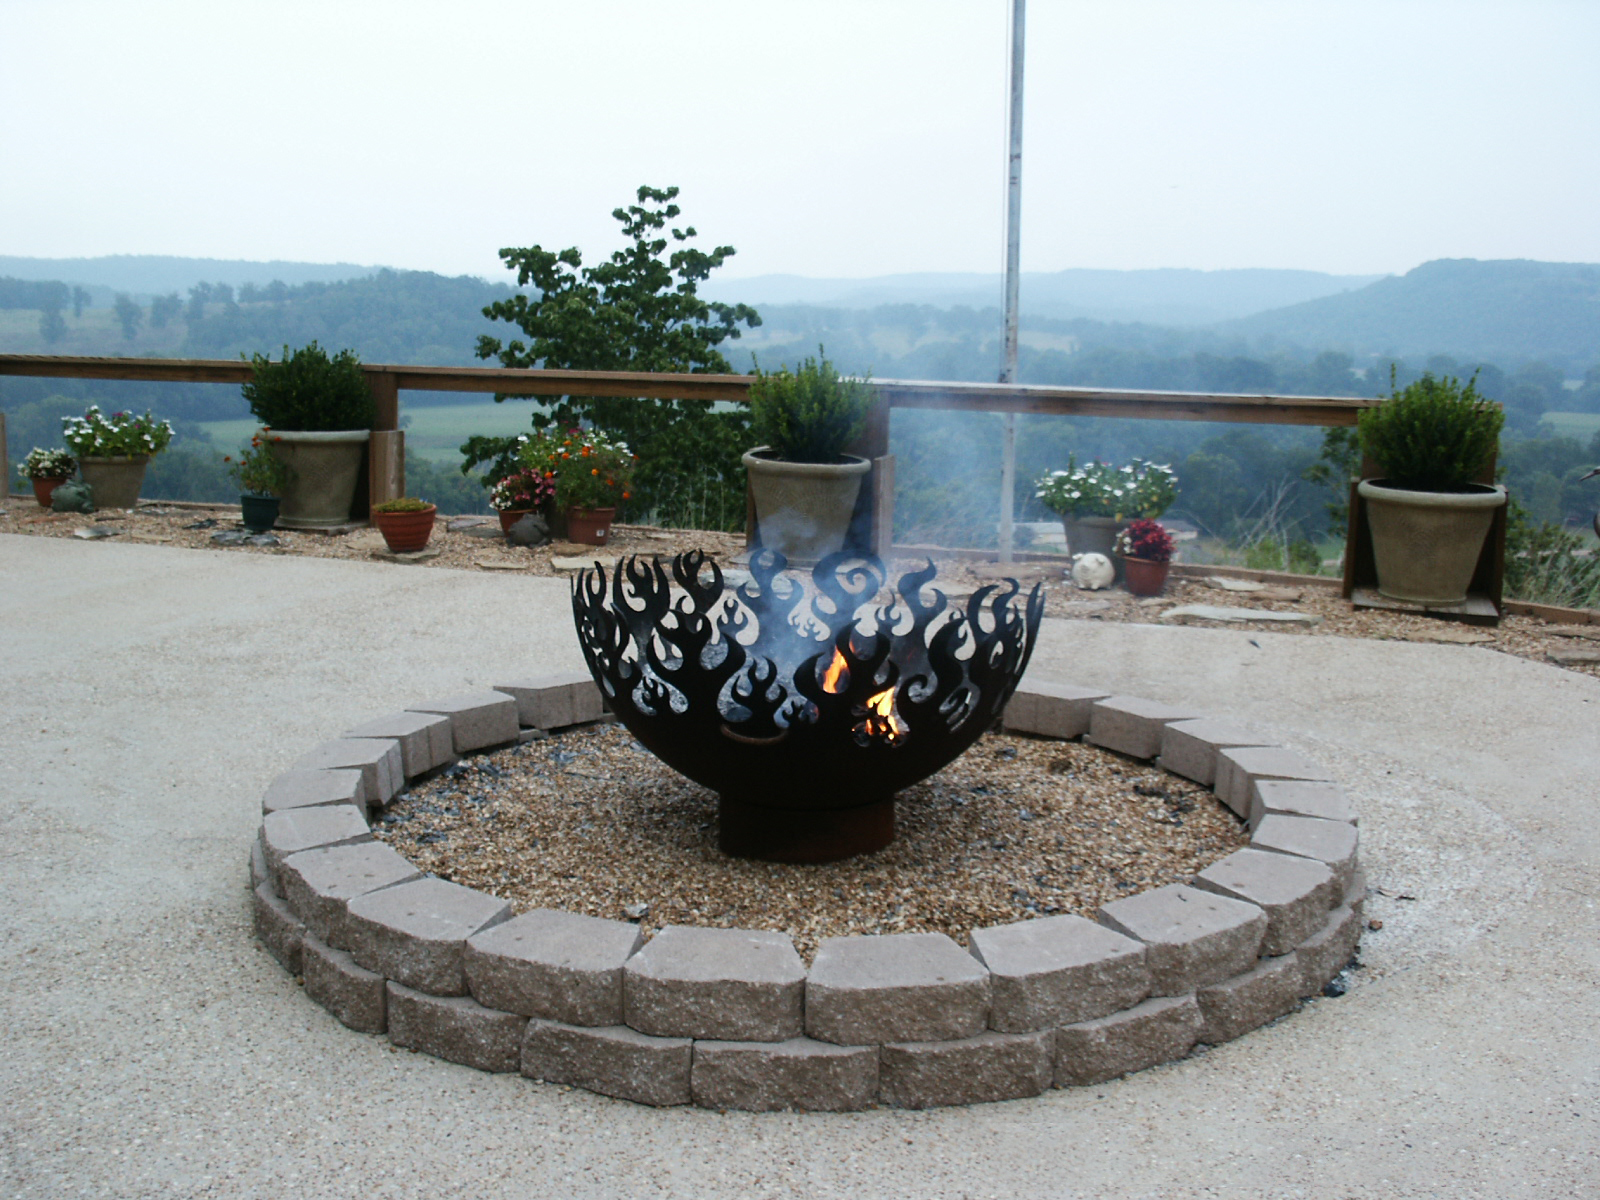 Great Bowl O' Fire 41 Inch Sculptural Firebowl™ overlooking river in Norfolk, AR